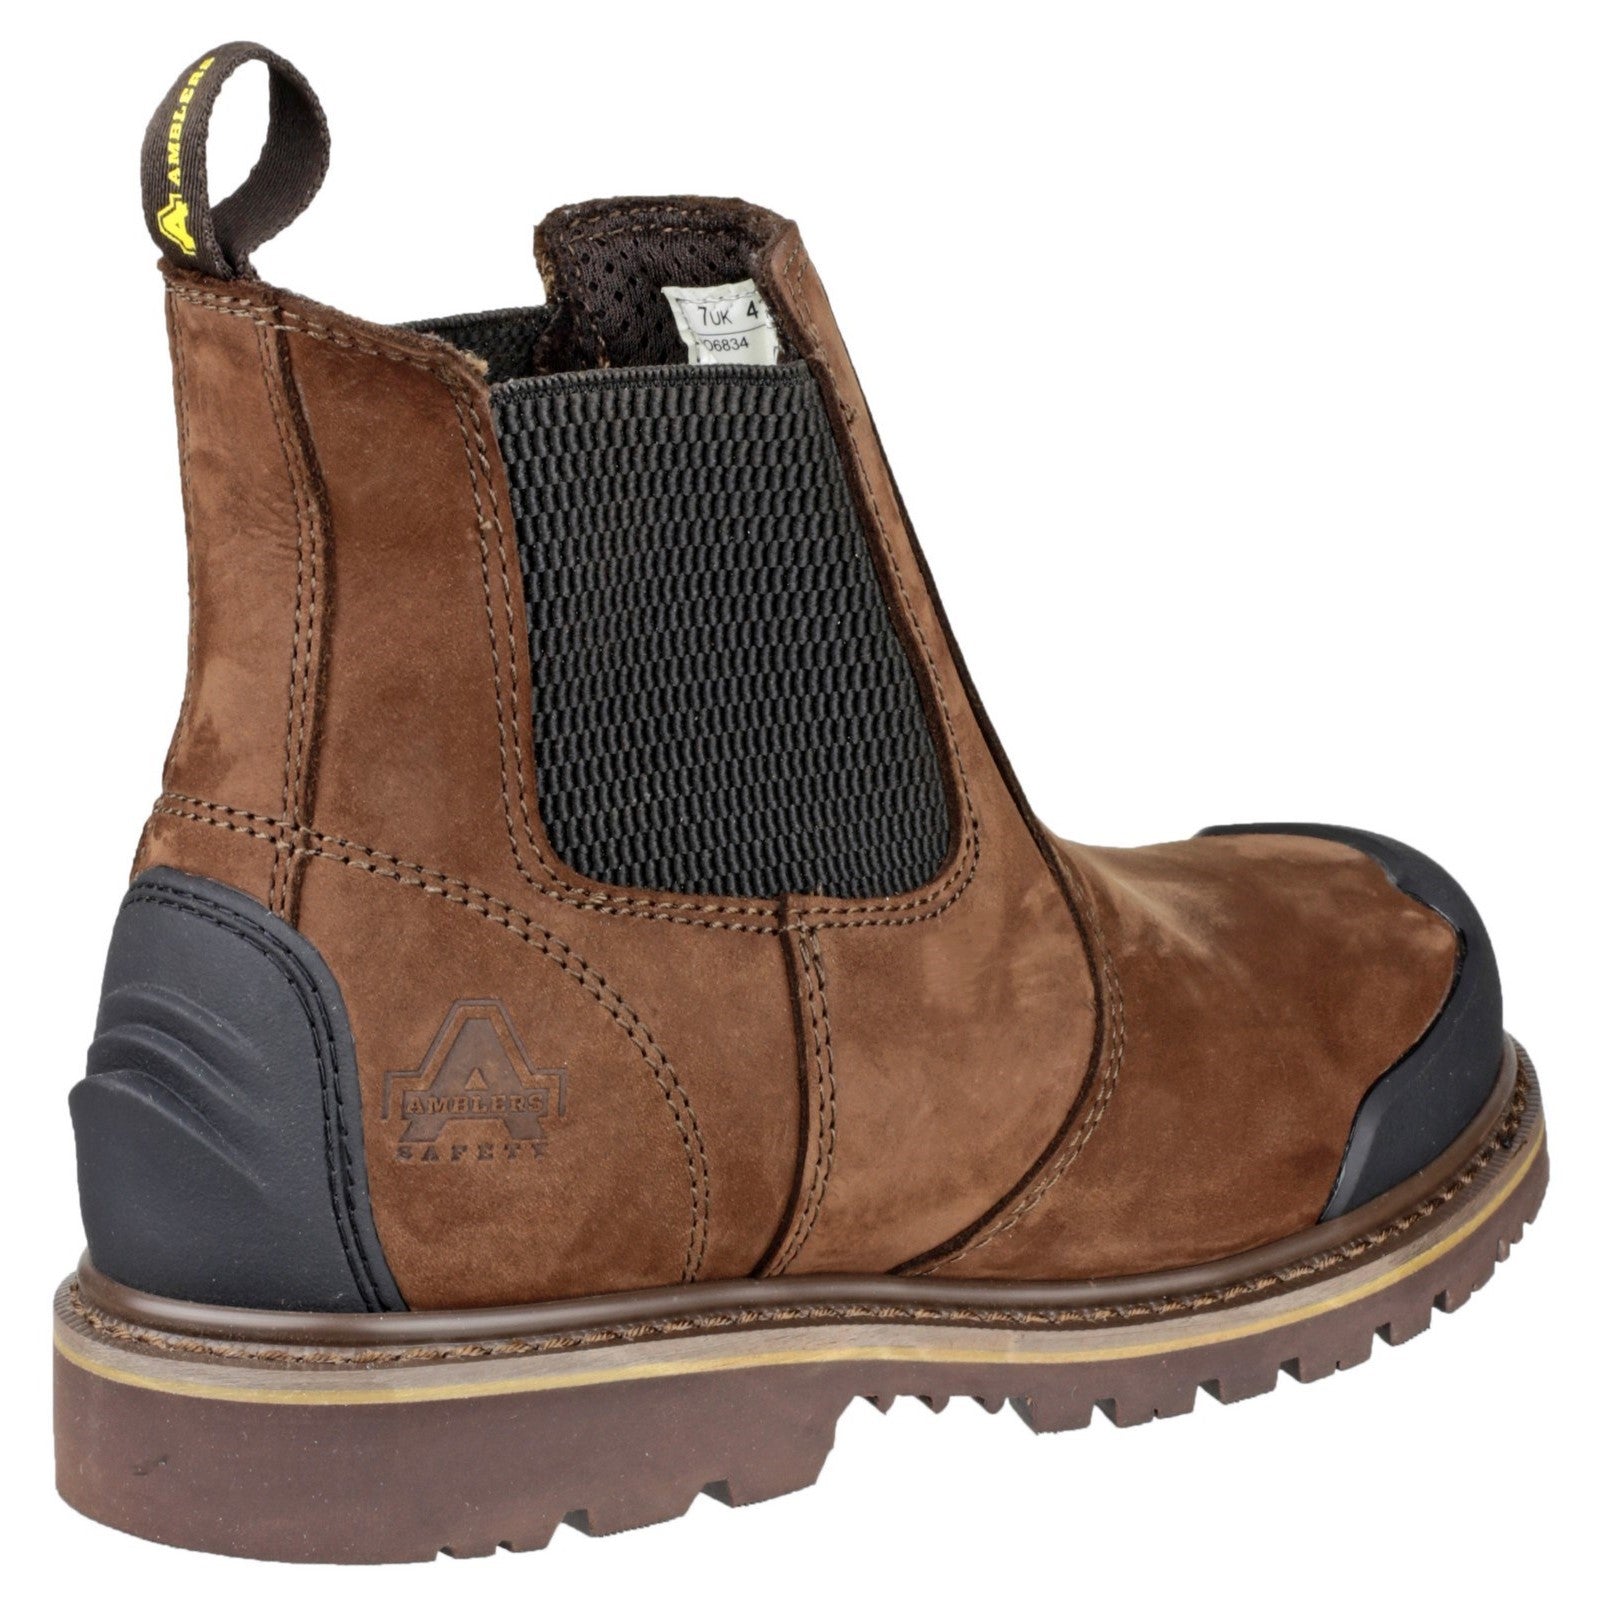 Amblers FS225 Goodyear Welted Waterproof Pull On Chelsea Safety Boot